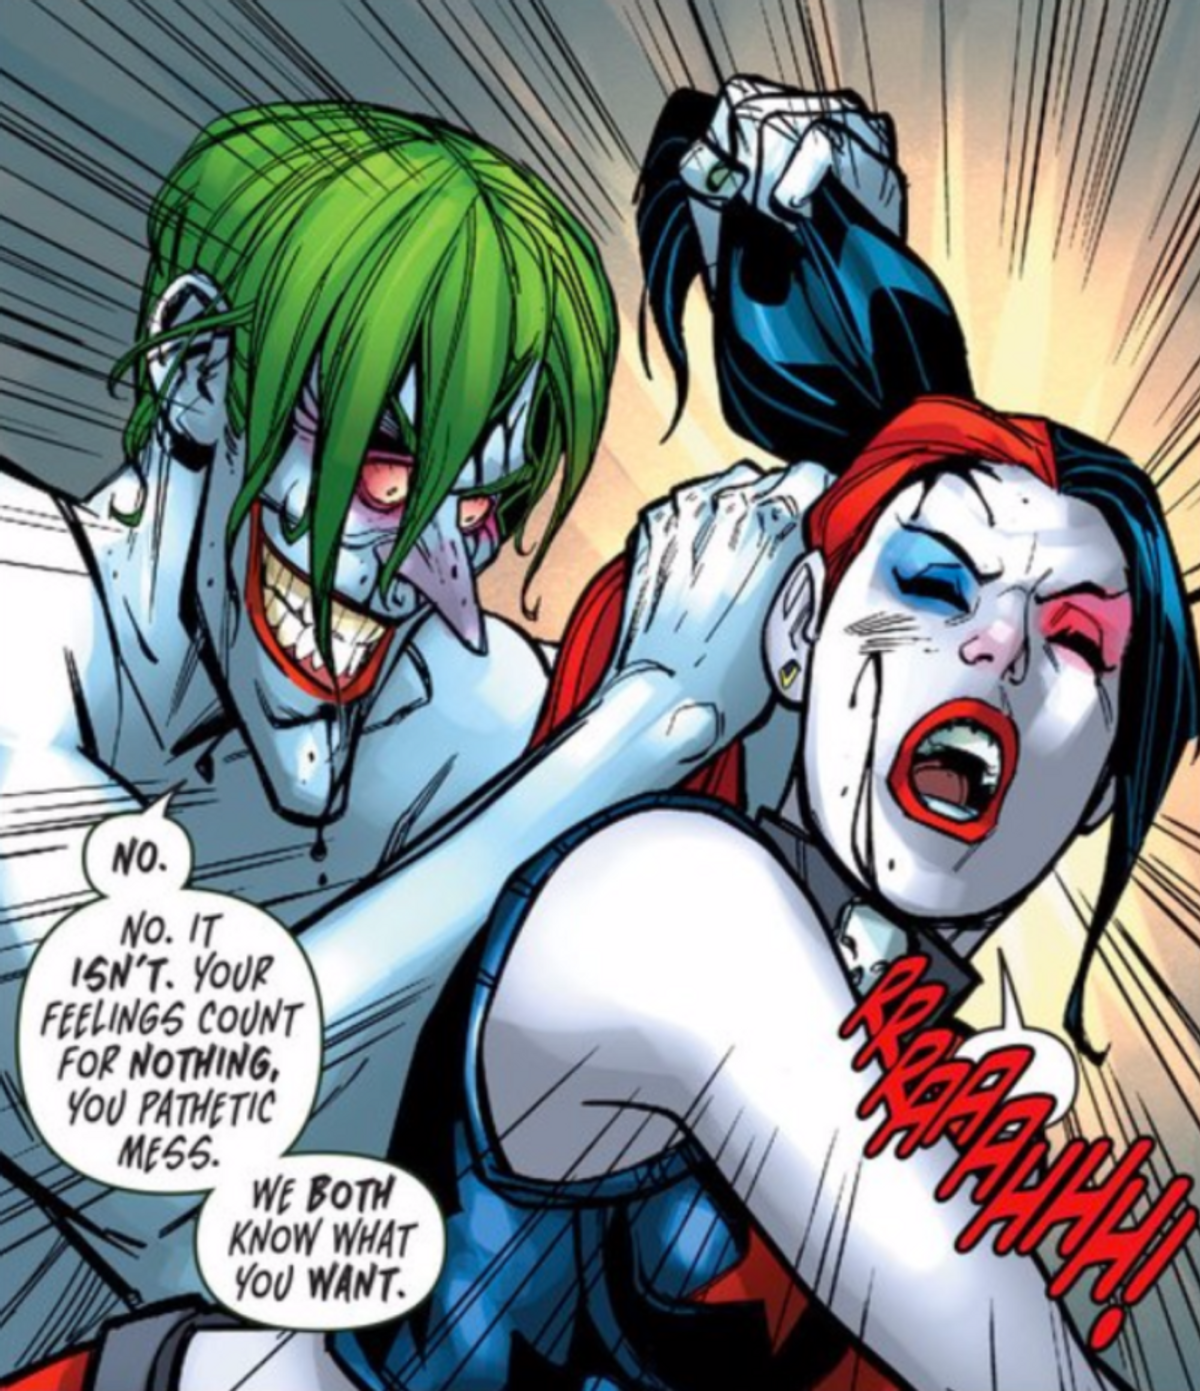 The Over-Sexualization Of Harley Quinn